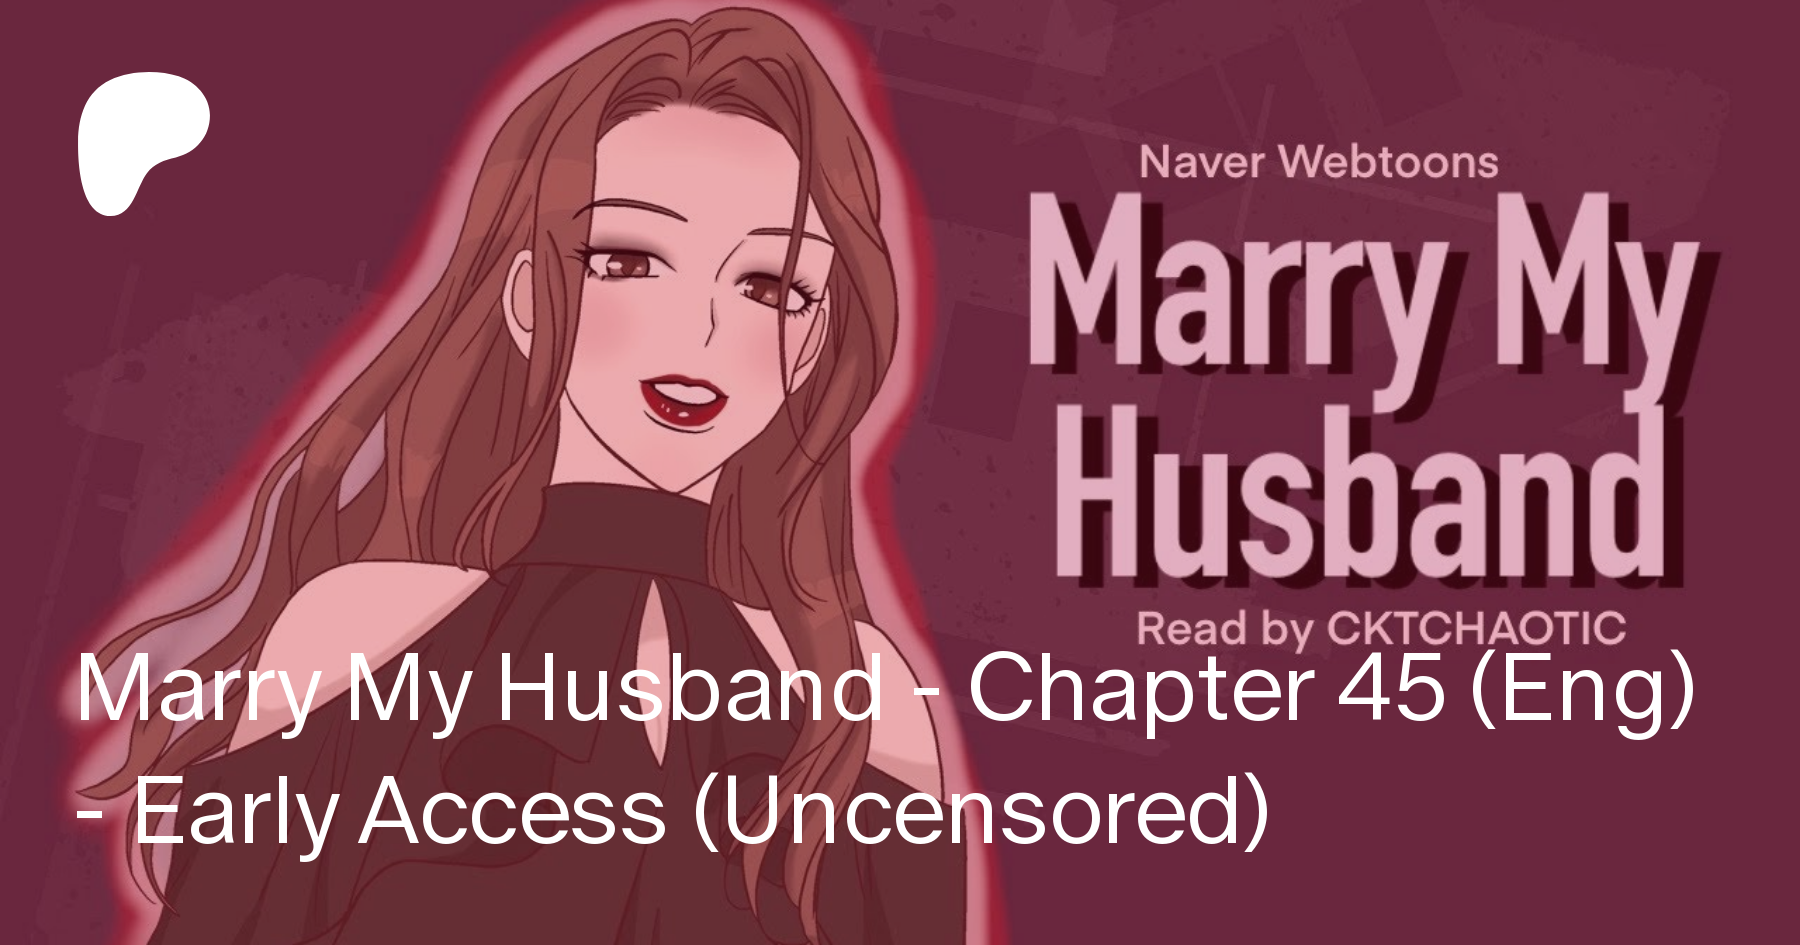 Marry My Husband Chap 45 Marry My Husband - Chapter 45 (Eng) - Early Access (Uncensored) | Patreon